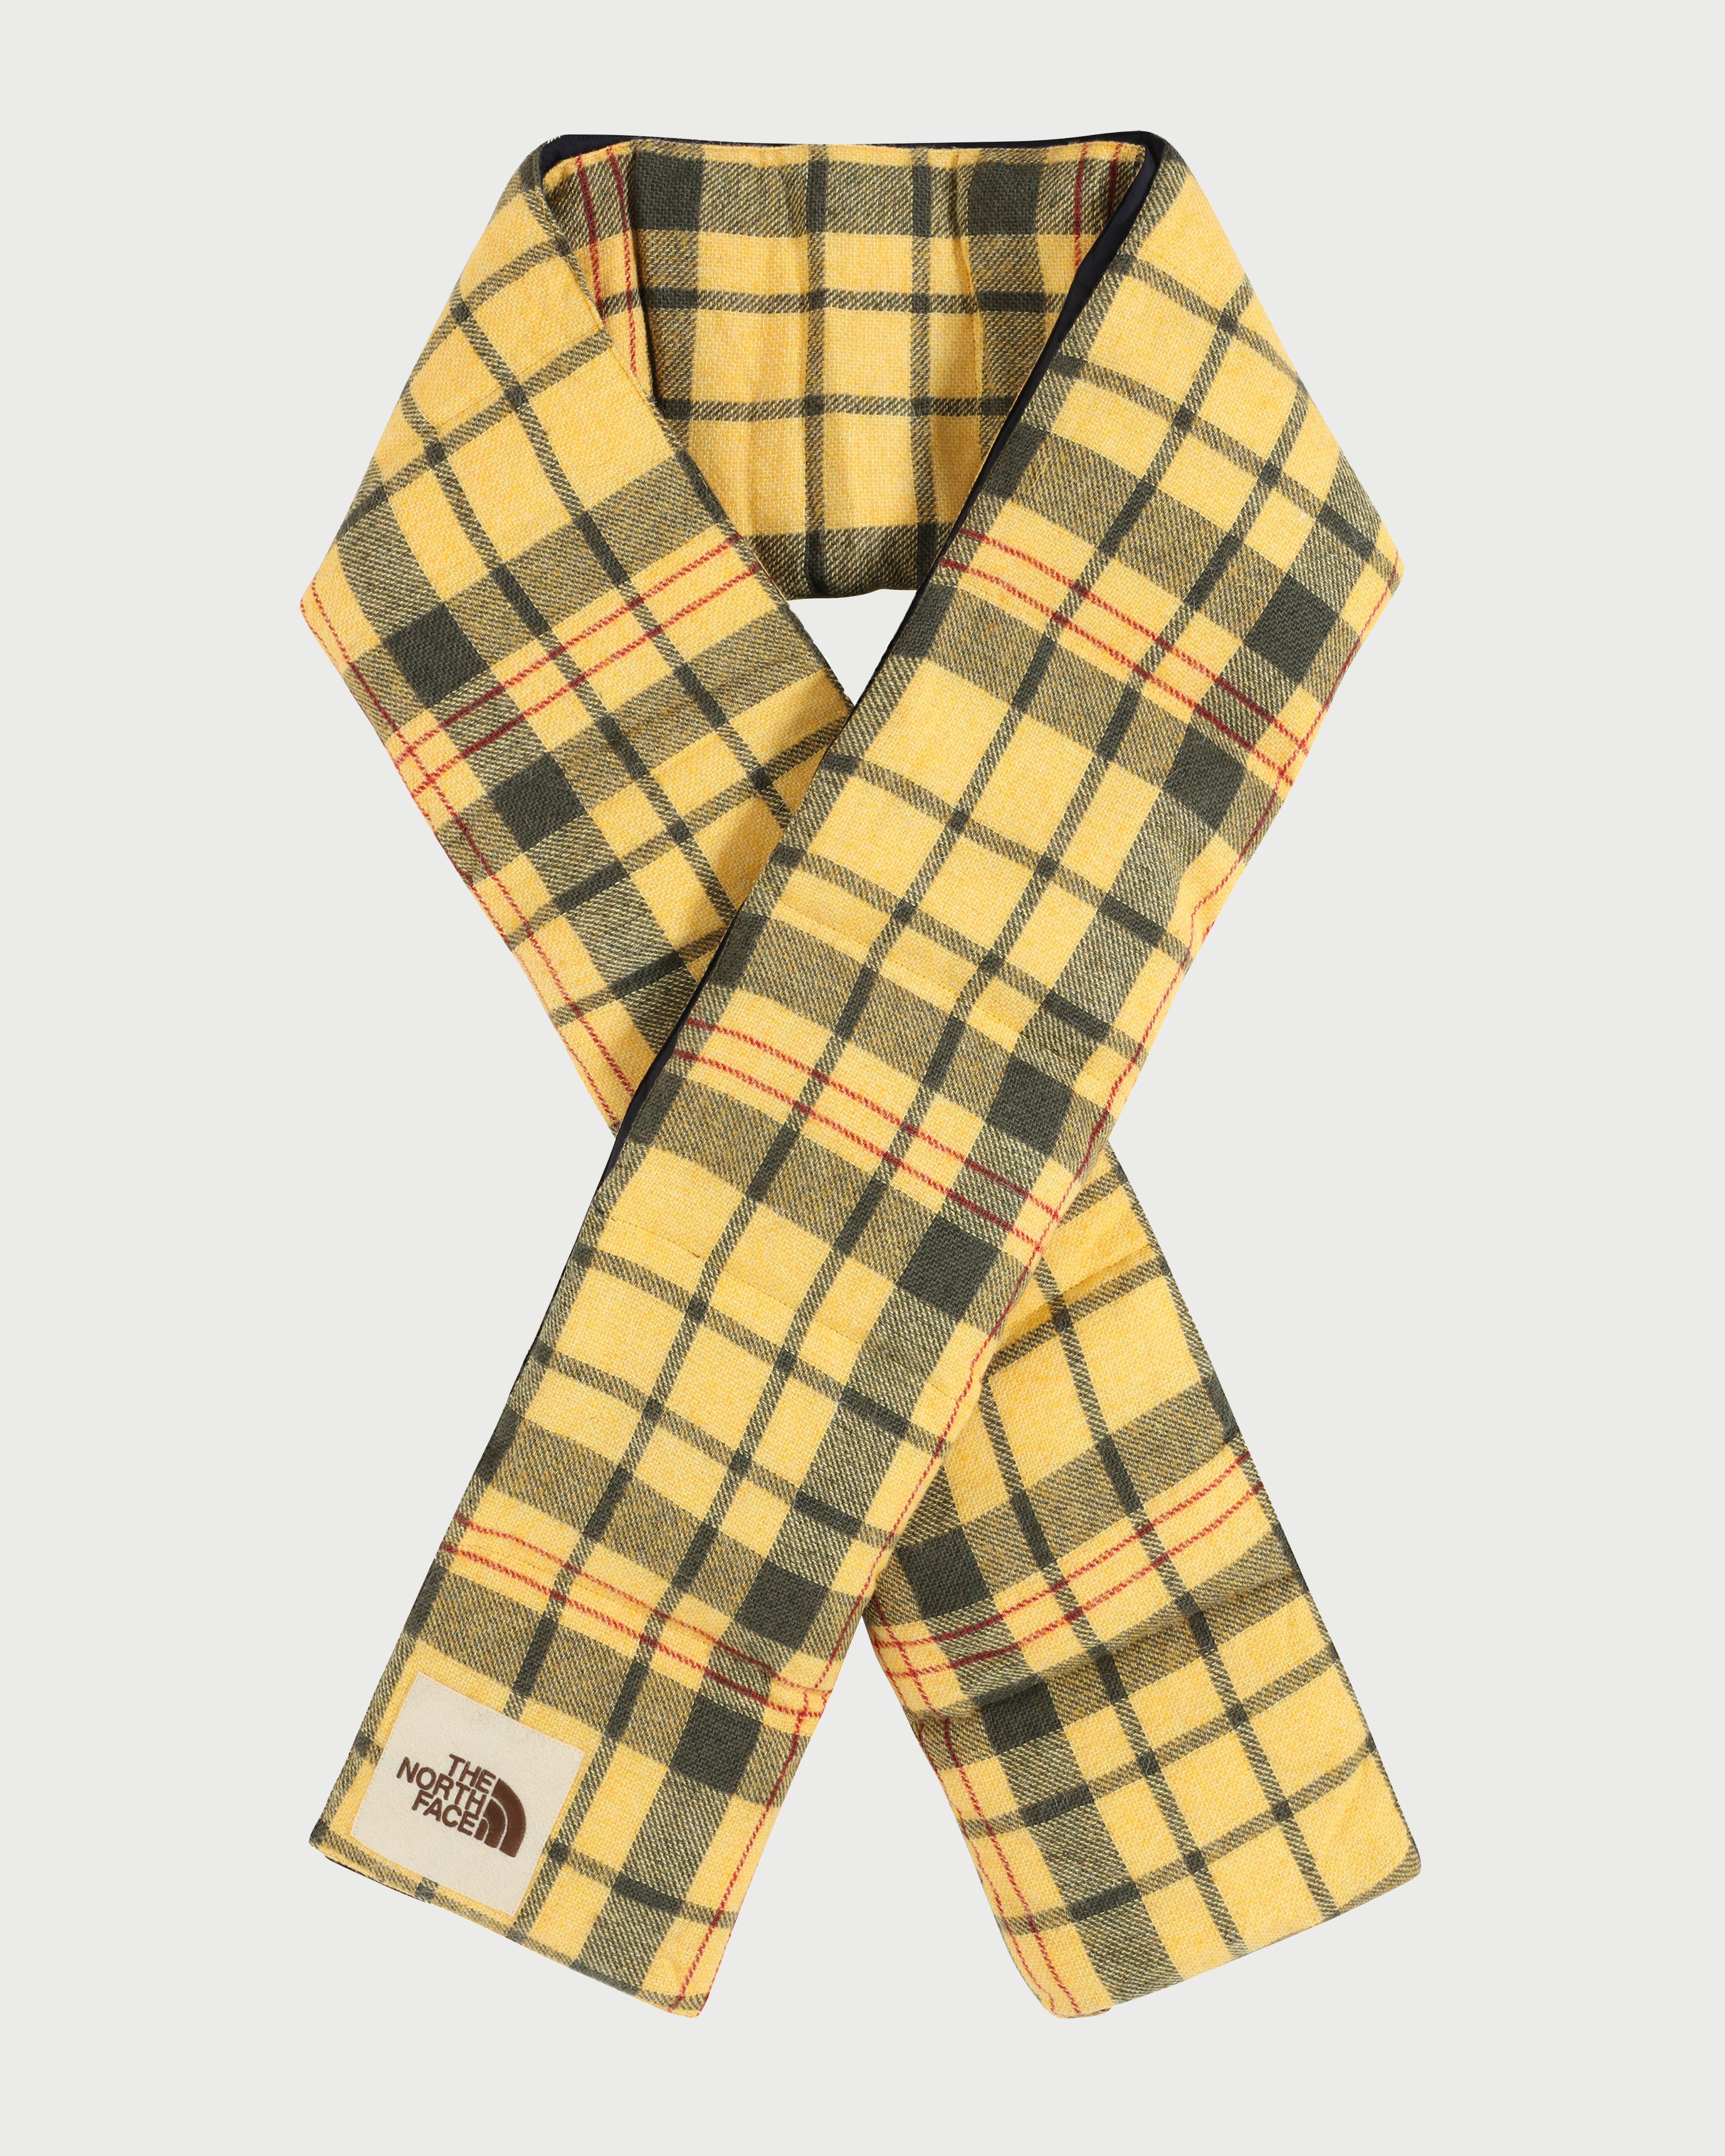 The North Face - Brown Label Insulated Scarf Summer Gold Heritage Unisex - Accessories - Yellow - Image 1